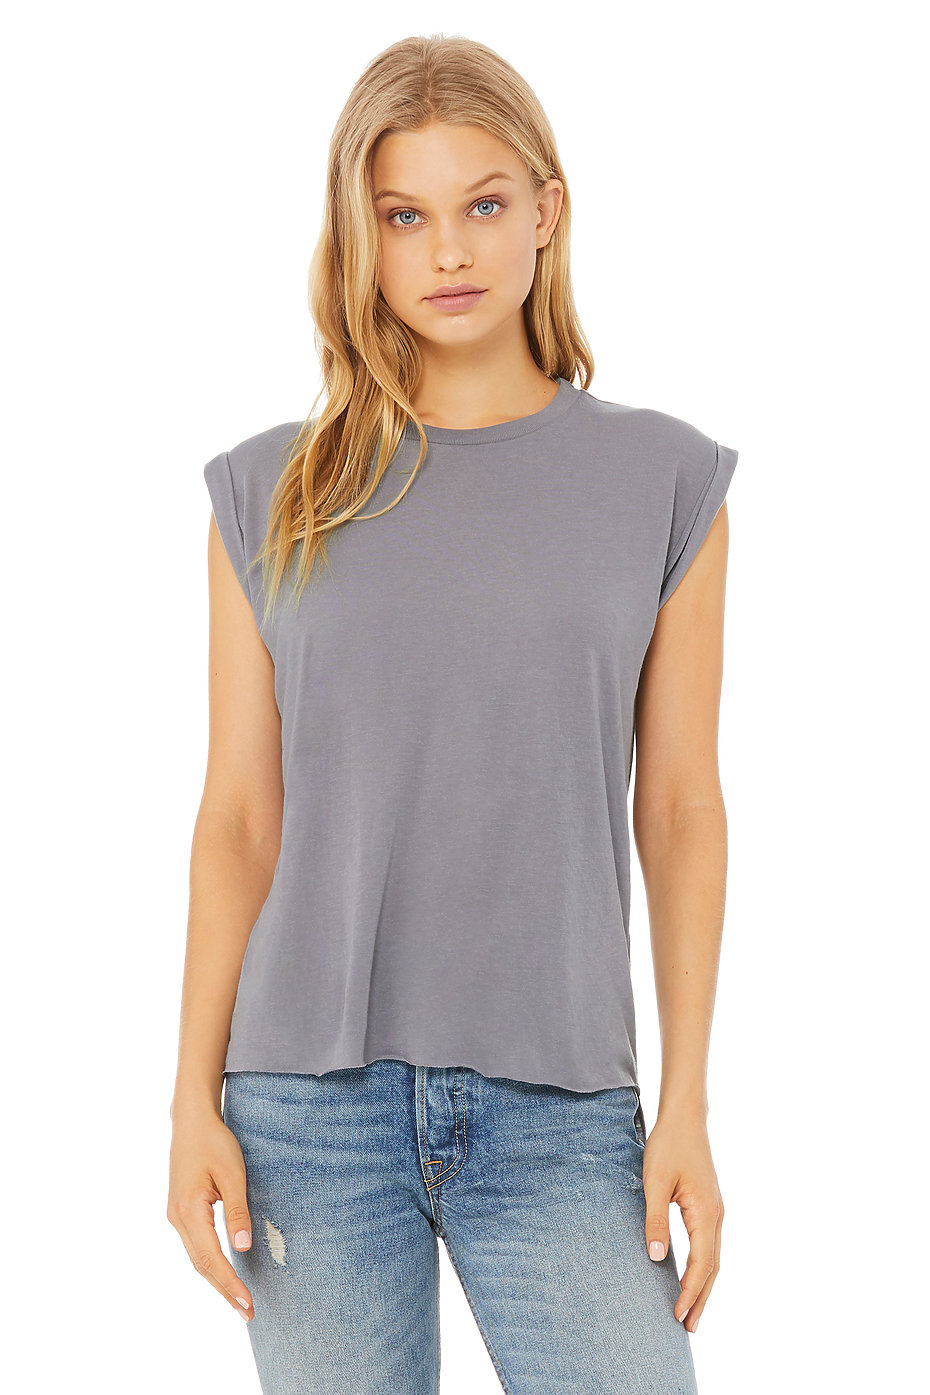 Women's 'Seize The Night' Distressed Print Flowy Muscle T-Shirt With Rolled Cuff